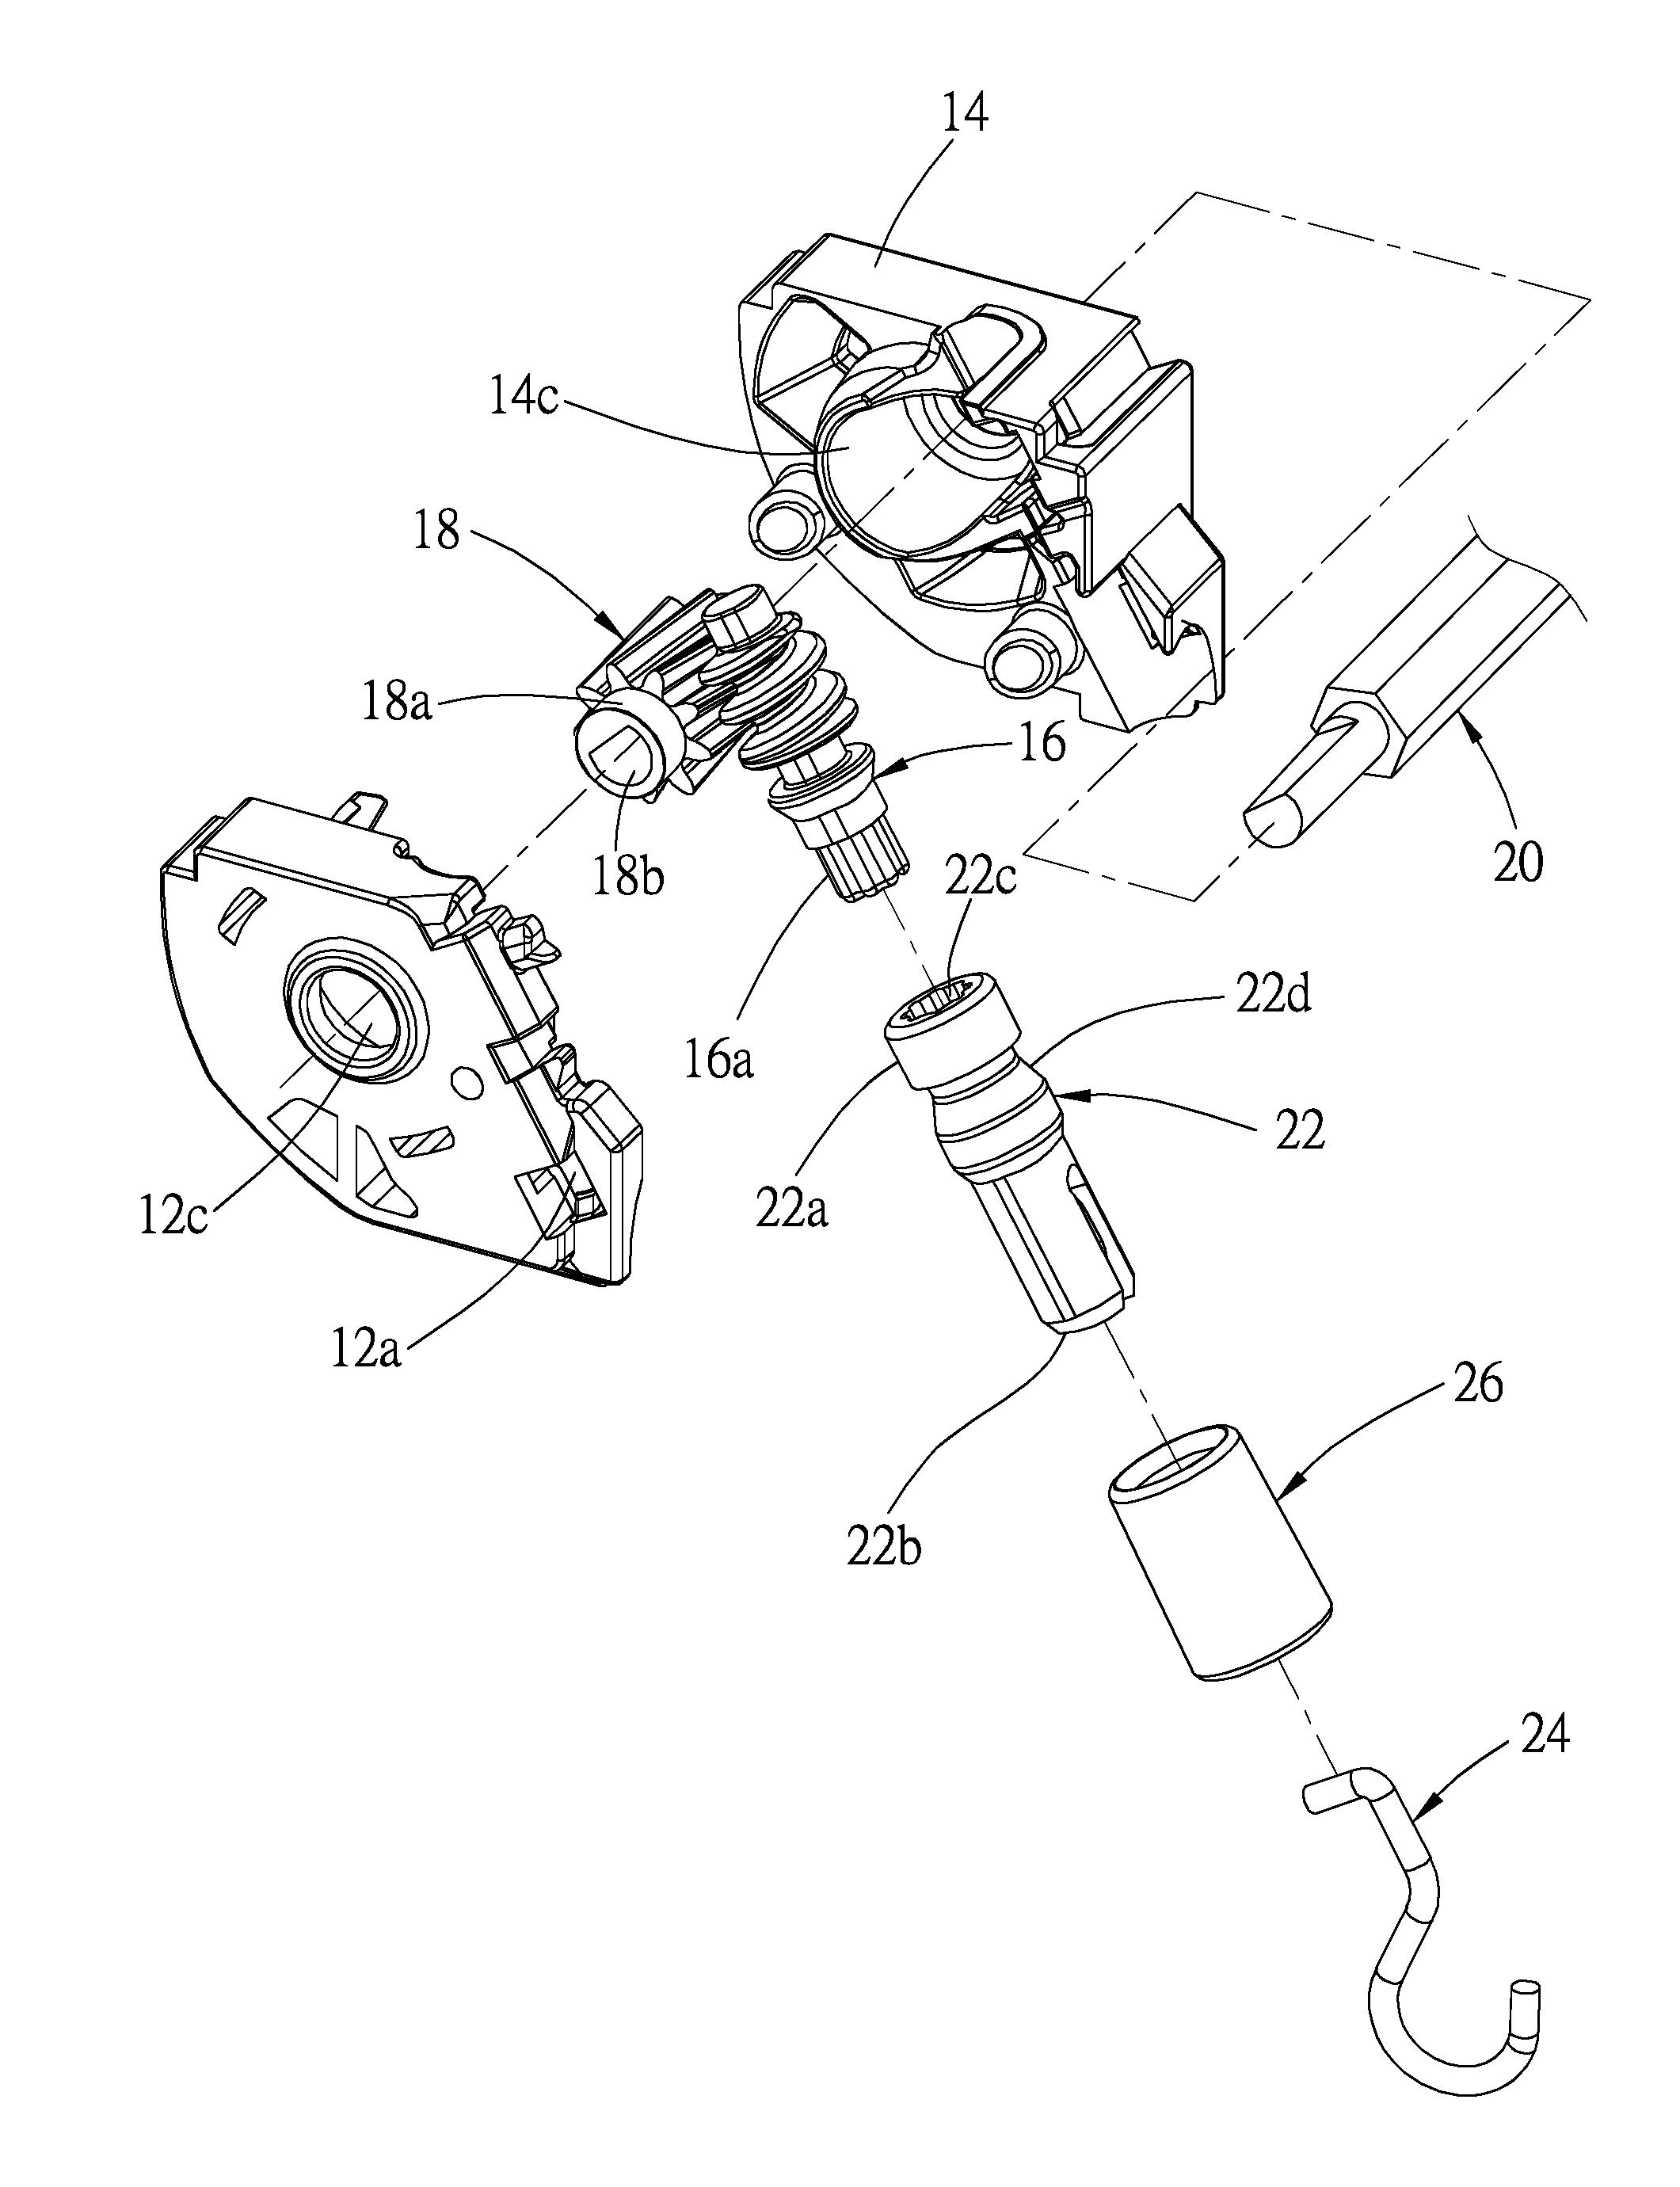 Separable tilting device